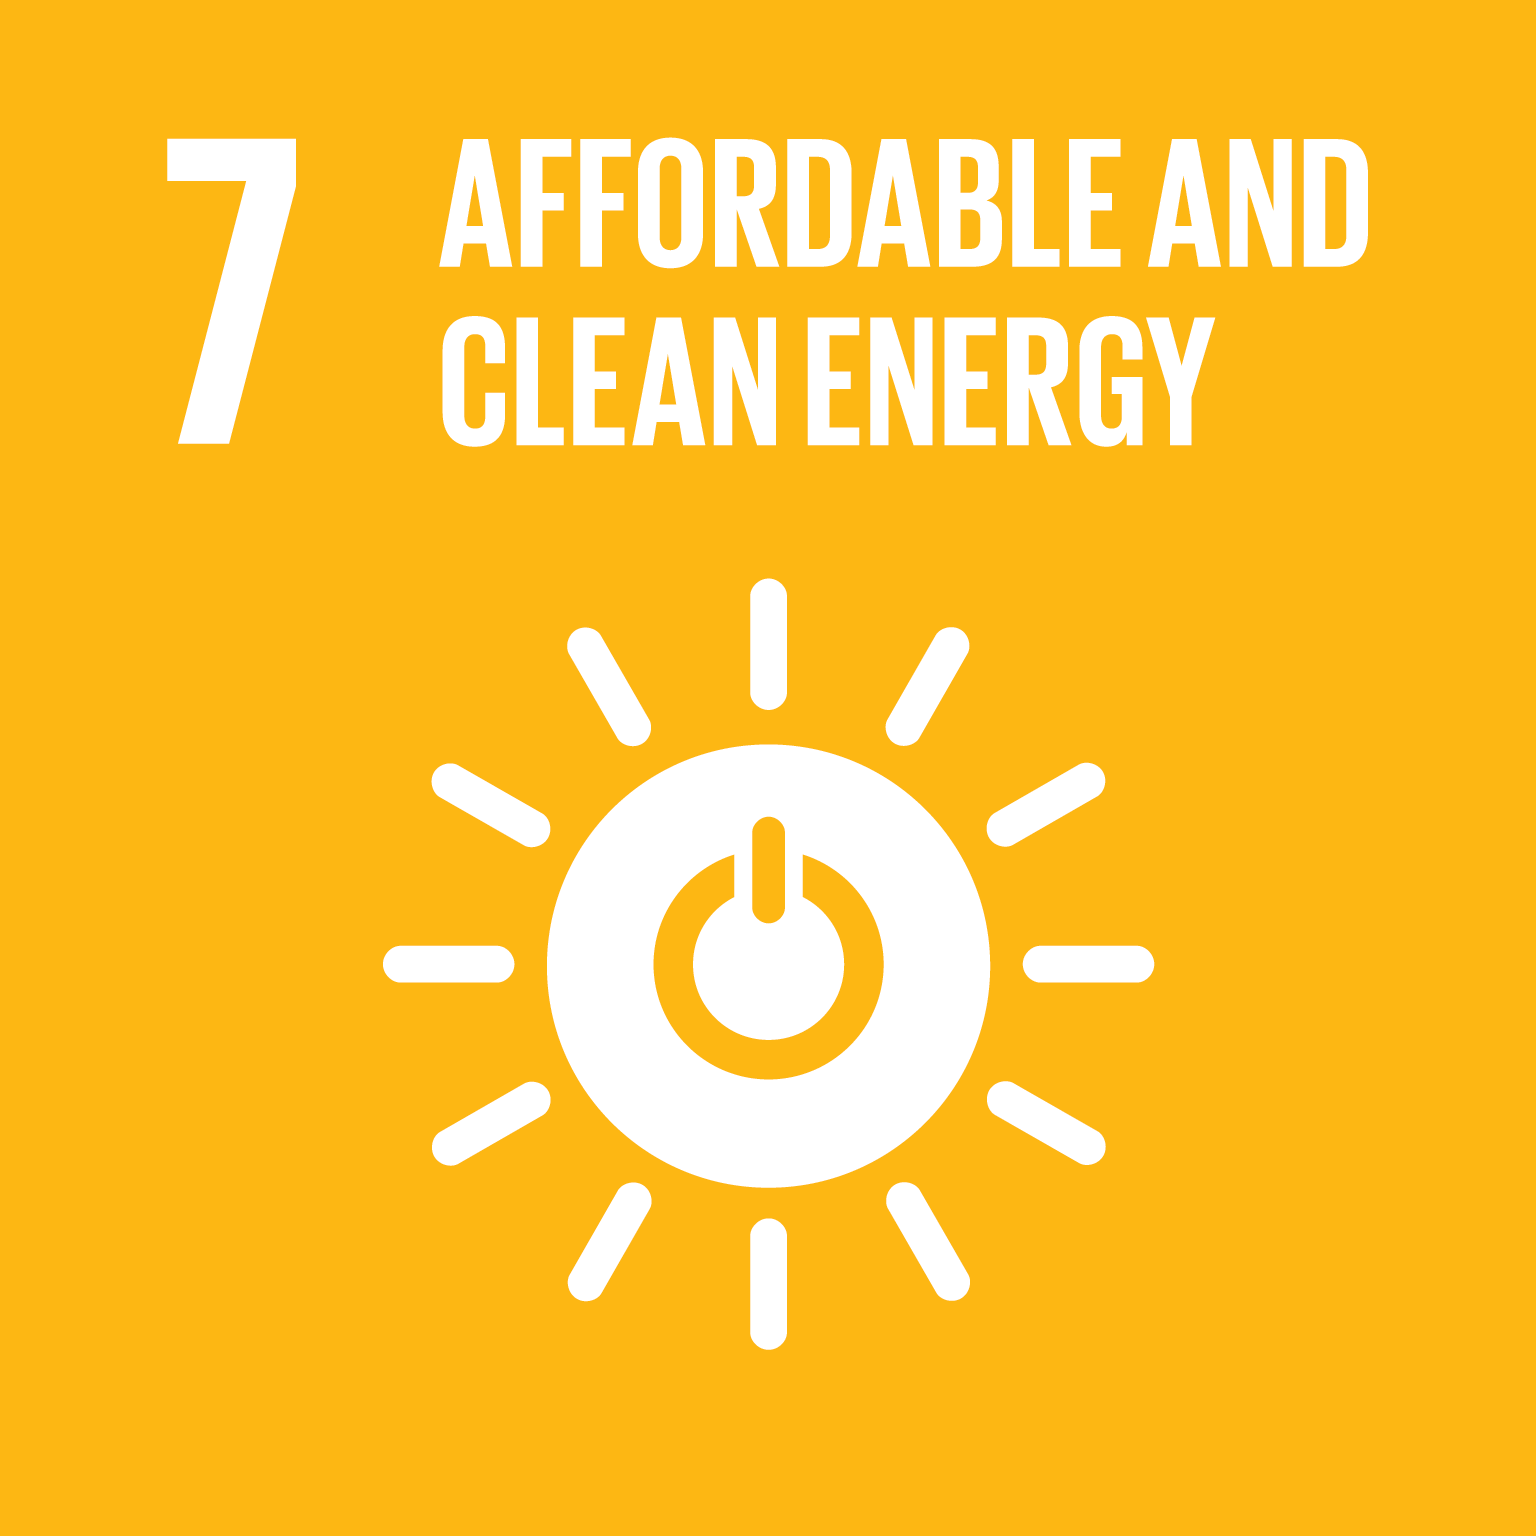 GOAL 7: Affordable and Clean Energy